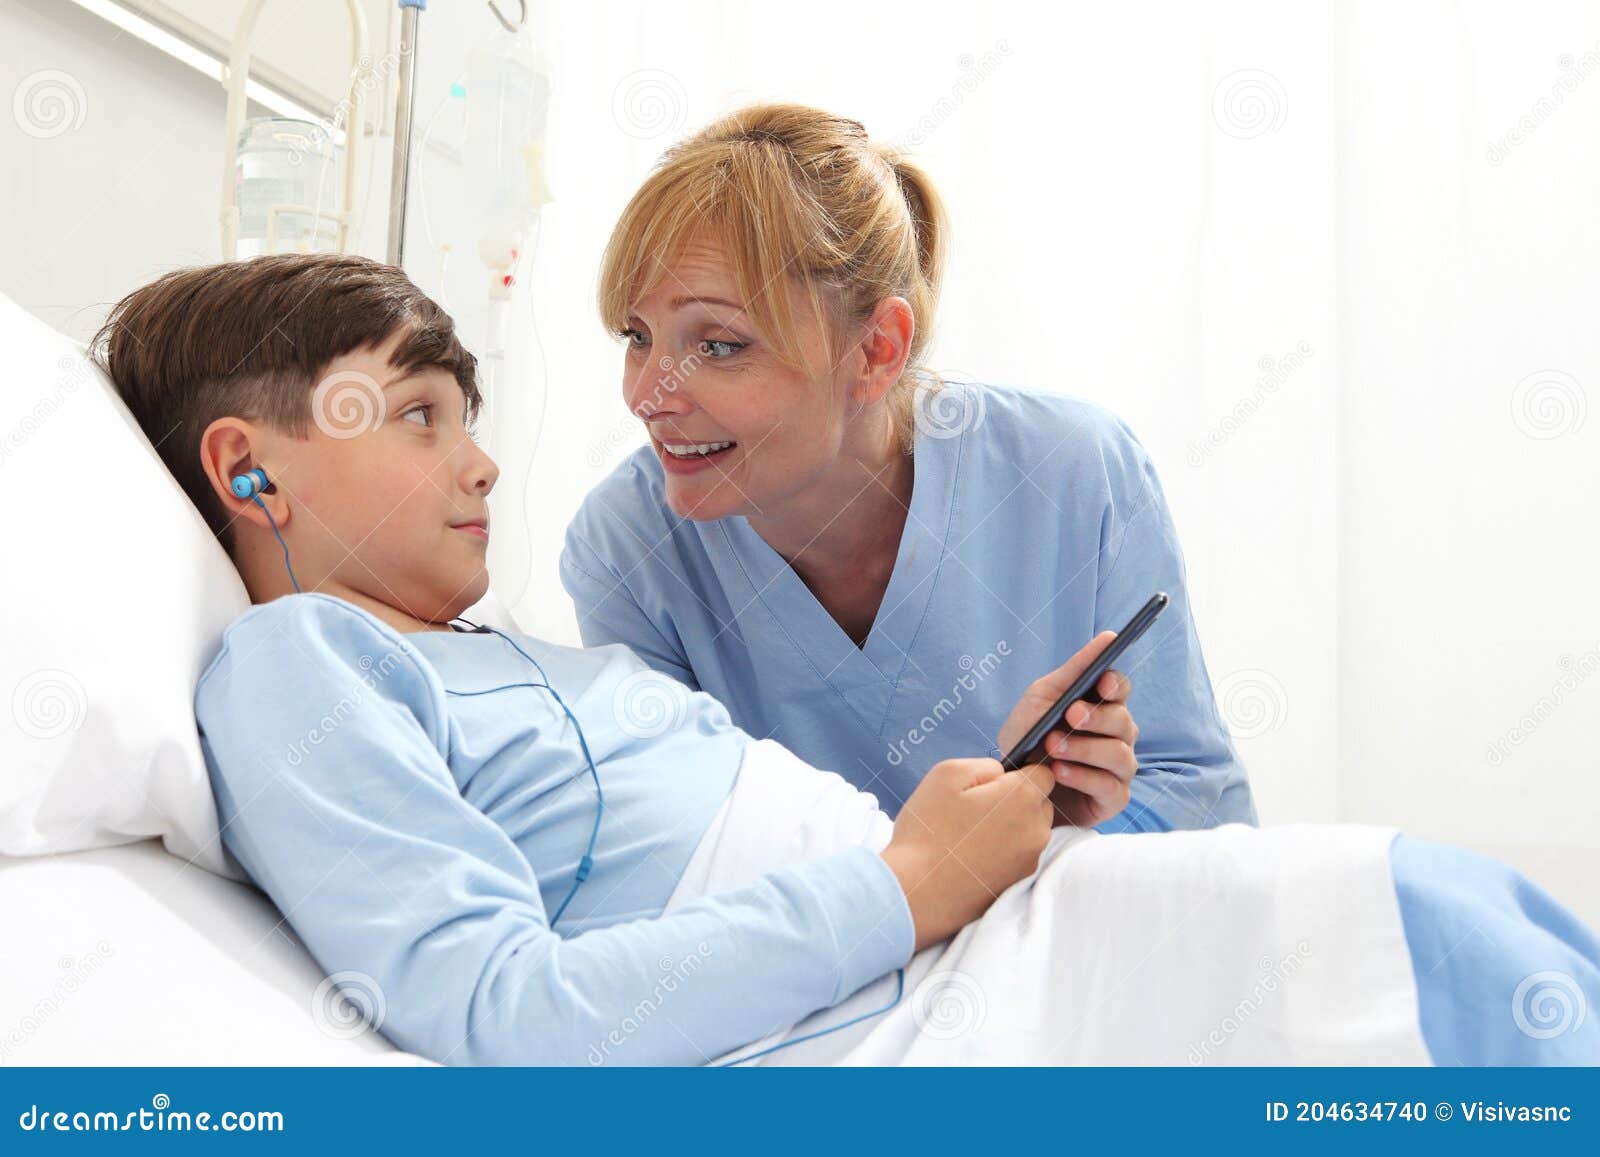 happy child lying in bed in hospital room and smiling nurse using smartphone surfs the internet wearing earphones